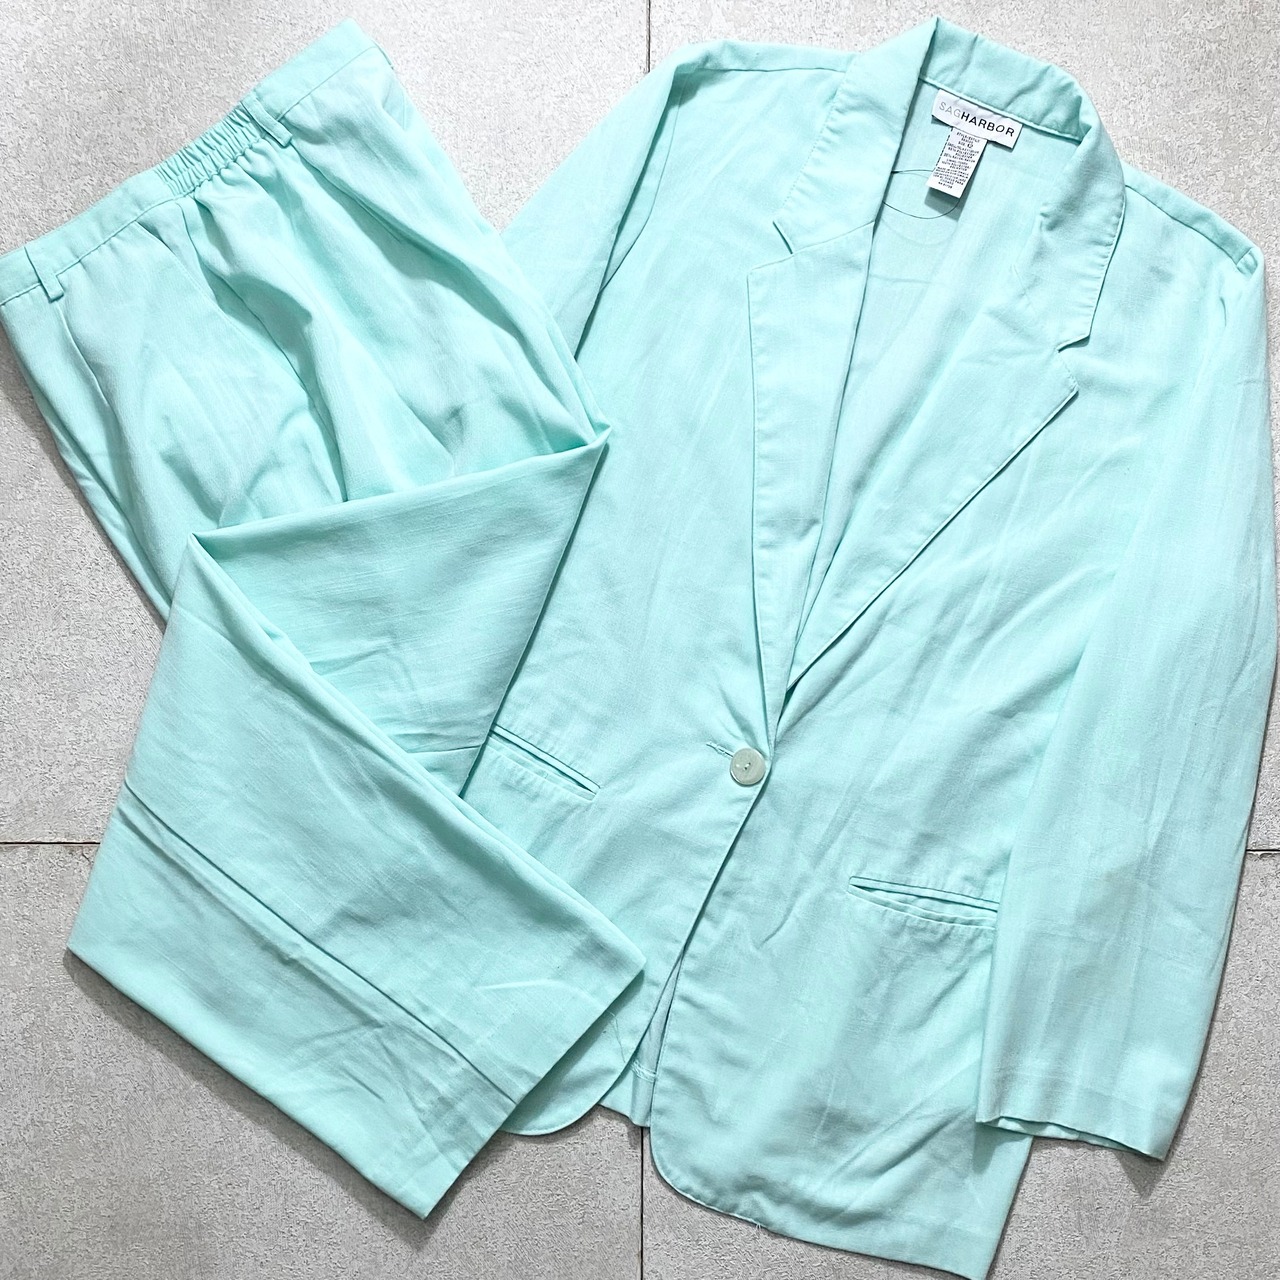 old turquoise color summer set-up